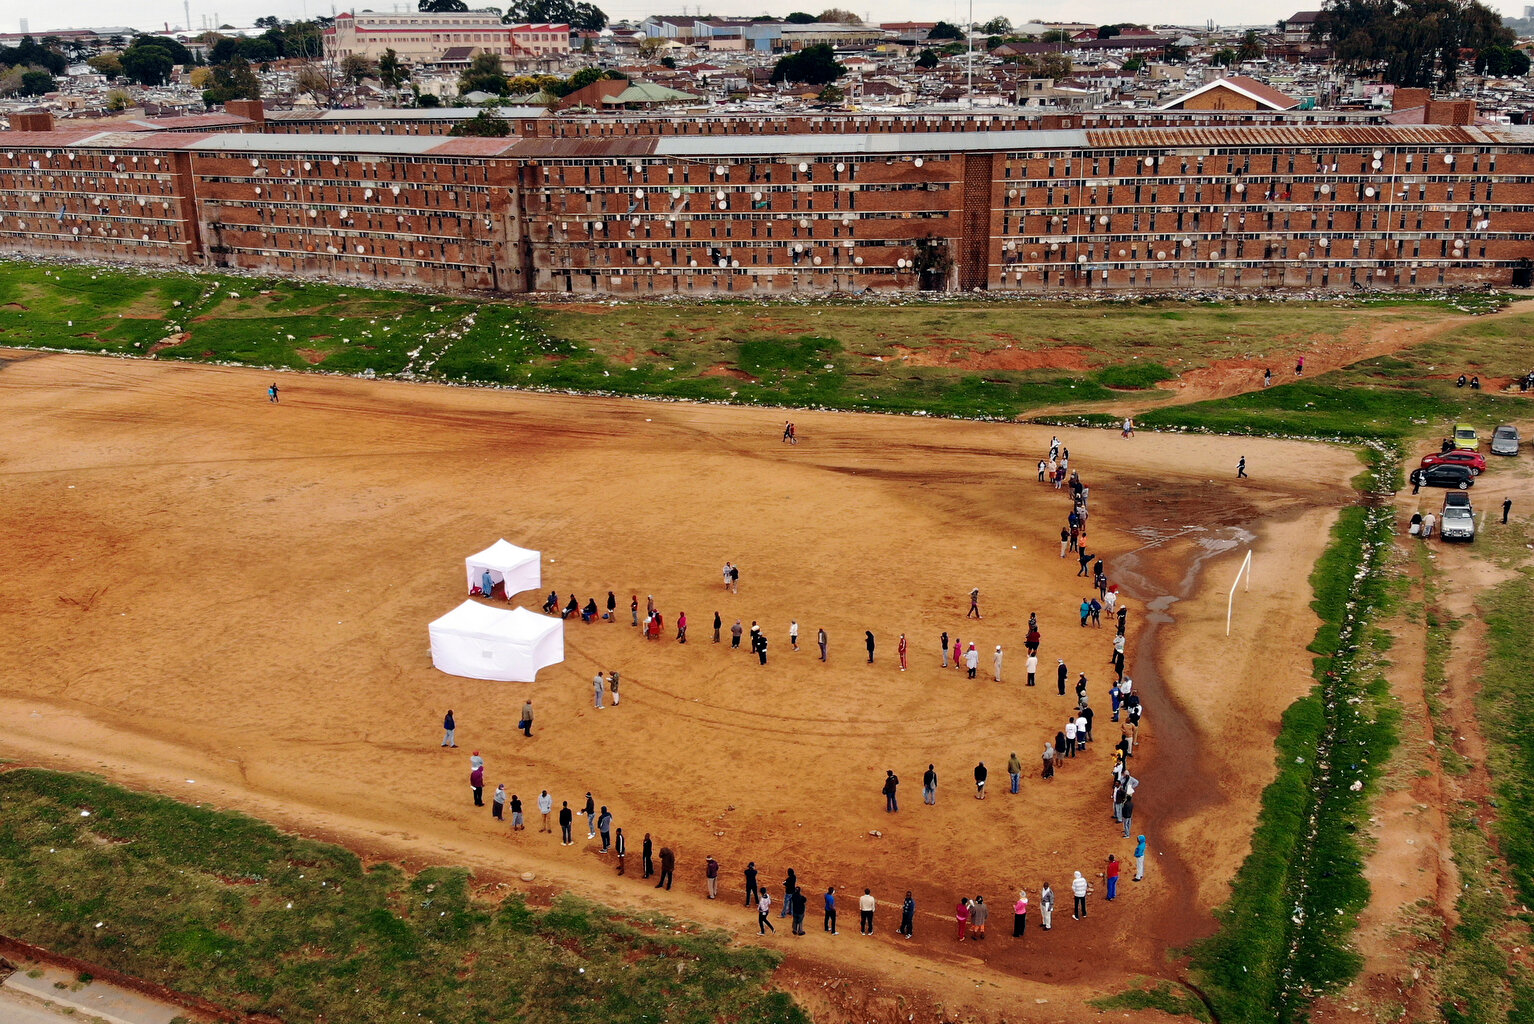  Residents from the Alexandra township in Johannesburg gather in a stadium to be tested for COVID-19 Wednesday, April 29, 2020. It was just a question of time until Africa would fall prey to the COVID-19 pandemic. Already seasoned by years of conflic